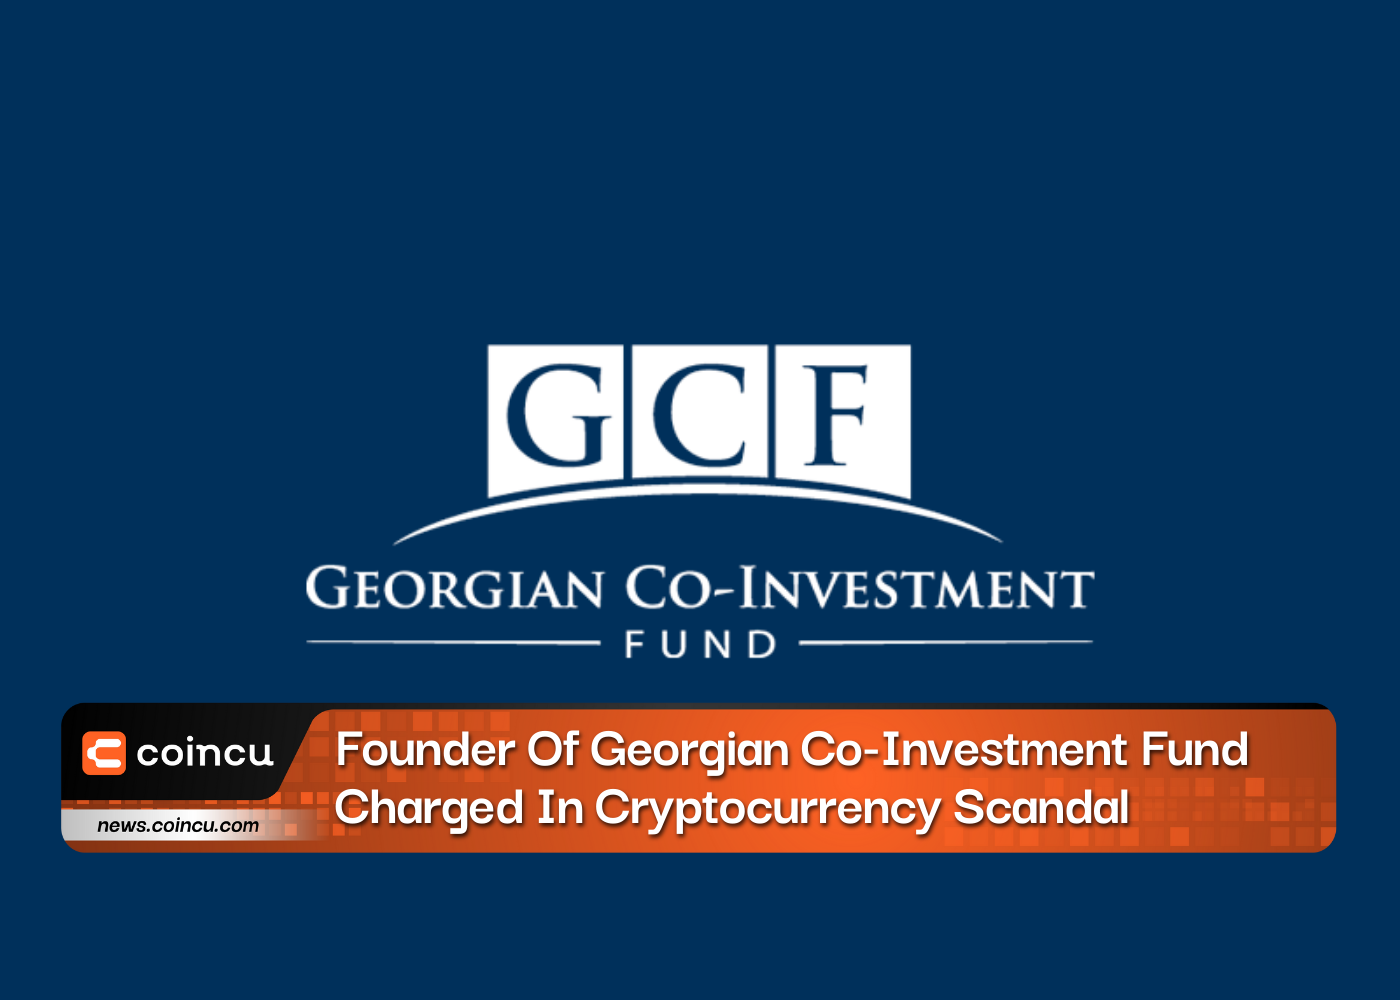 Founder Of Georgian Co-Investment Fund Charged In Cryptocurrency Scandal